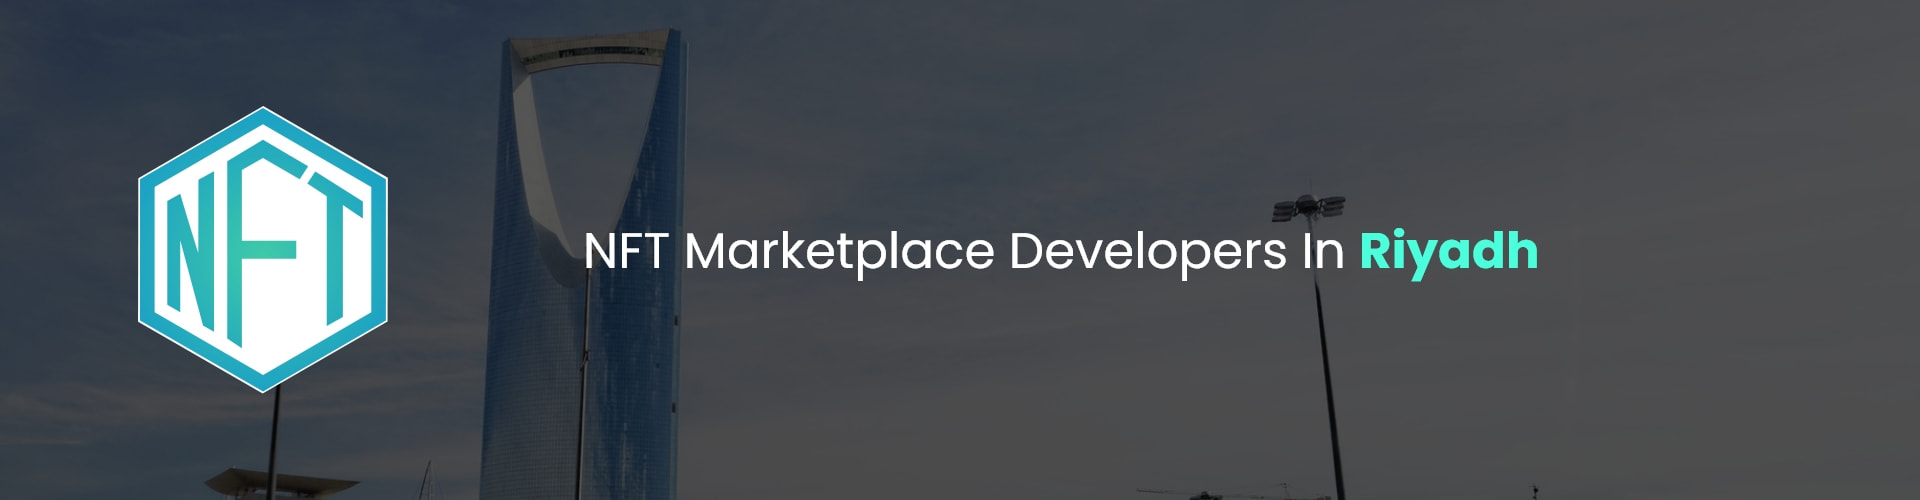 hire nft marketplace developers in Riyadh